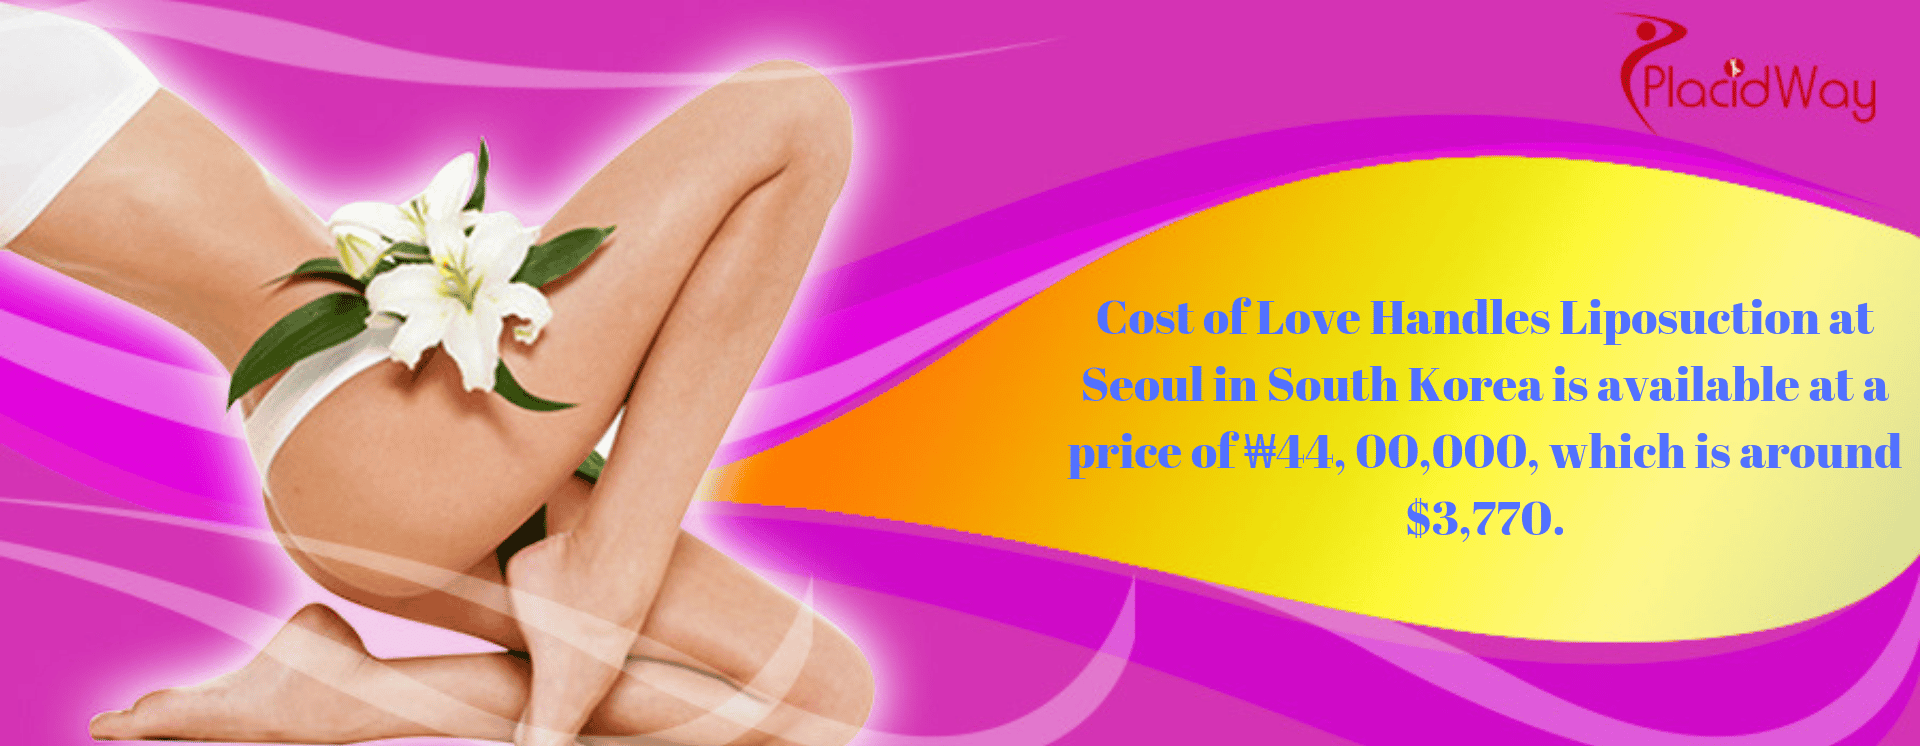 Cost of Love Handles Liposuction at Seoul in South Korea is available at a price of ₩44, 00,000, which is around $3,770.